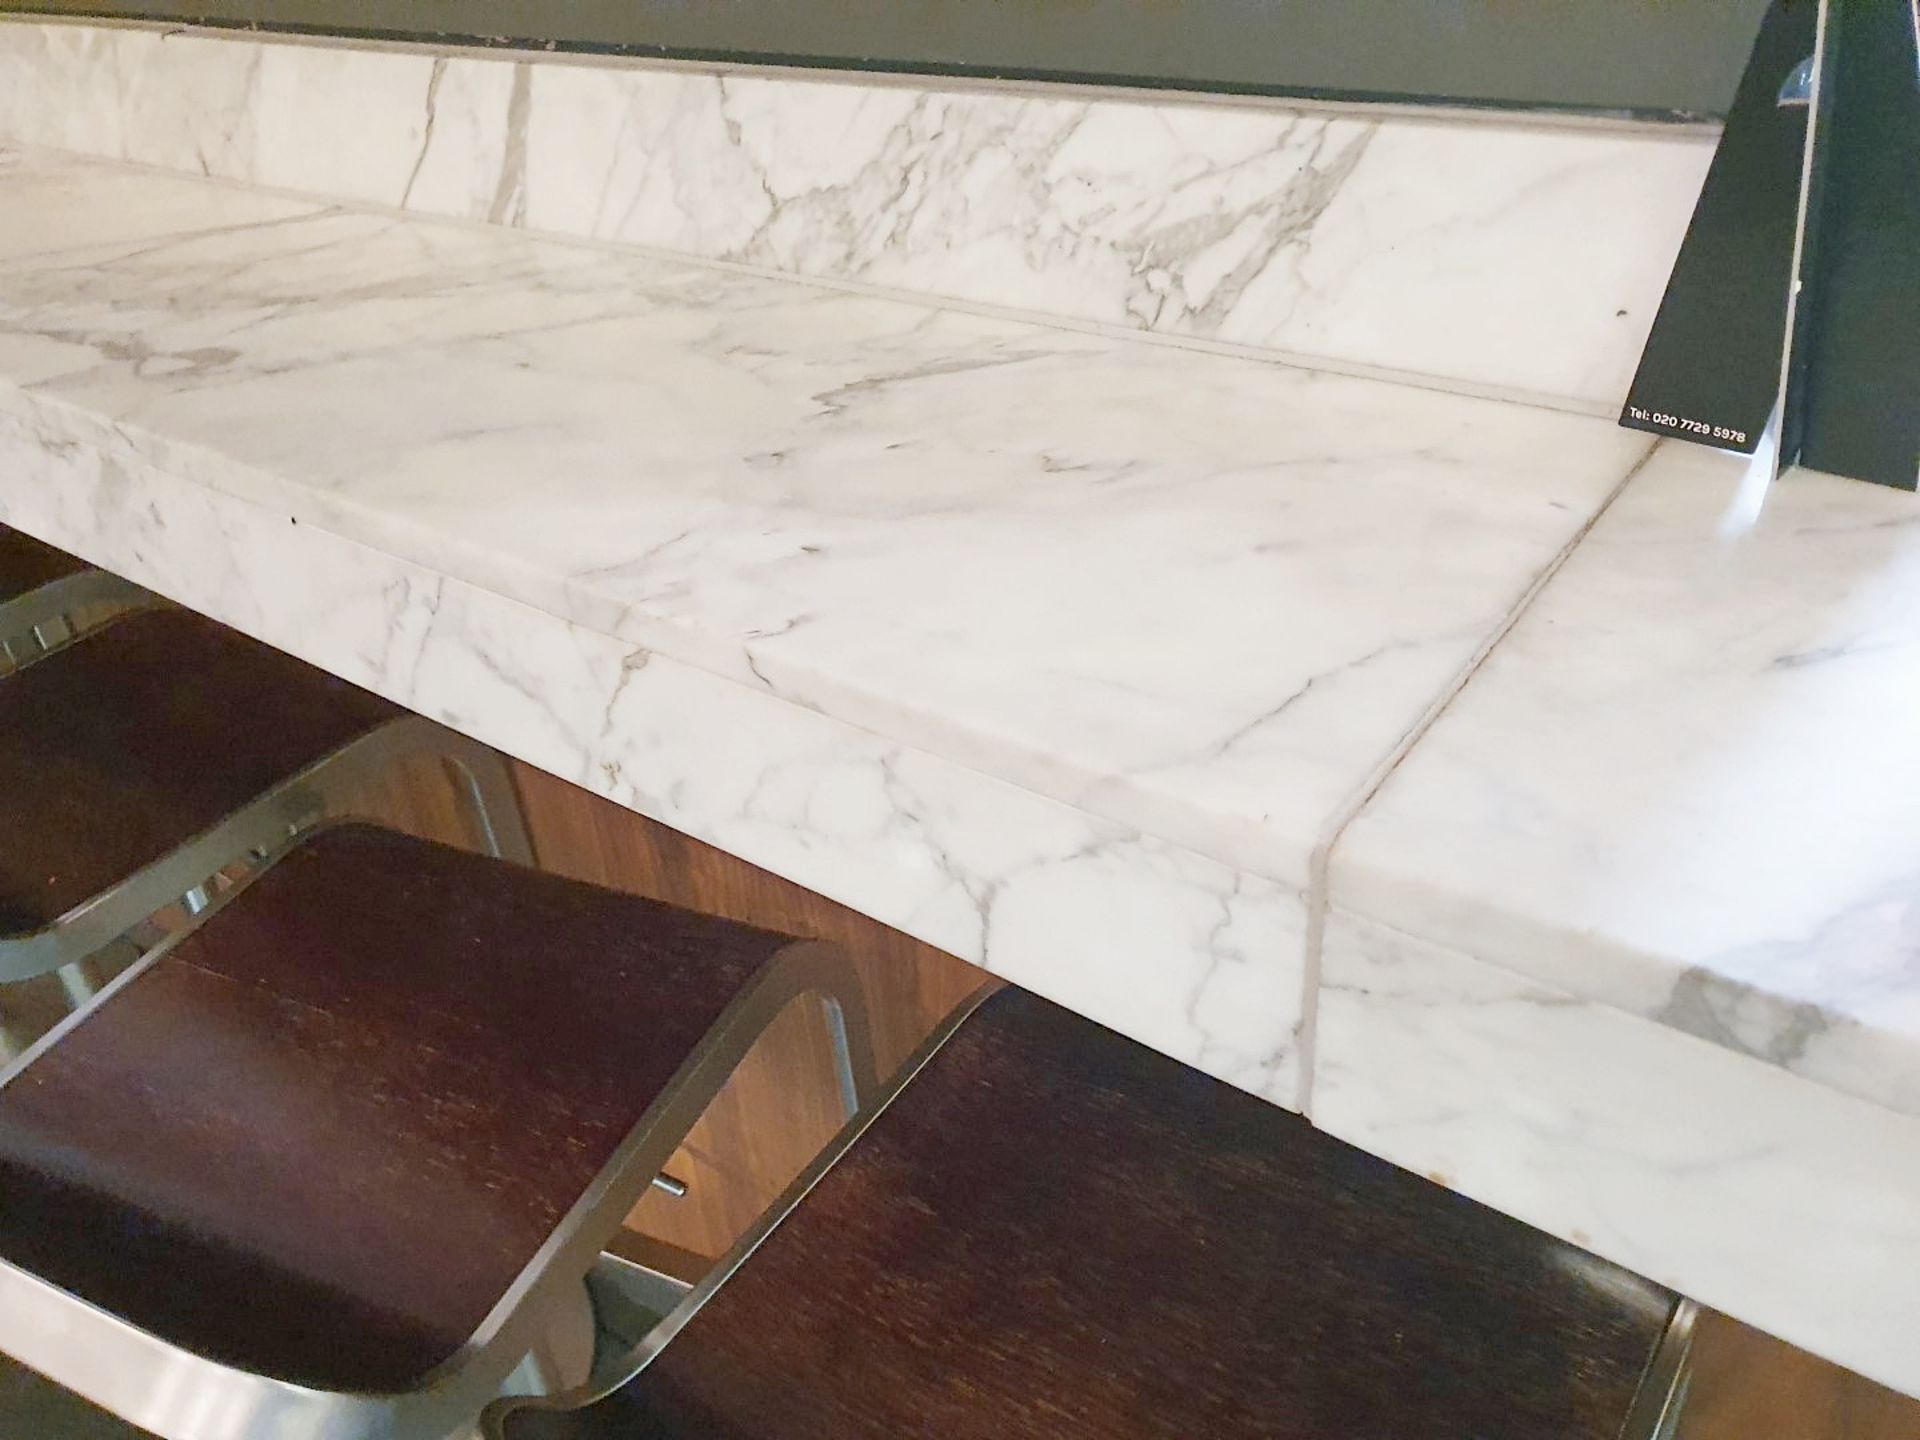 1 x White Marble/Granite Breakfast / Coffee Bar Central with Server station - Three piece - Ref: - Image 2 of 6